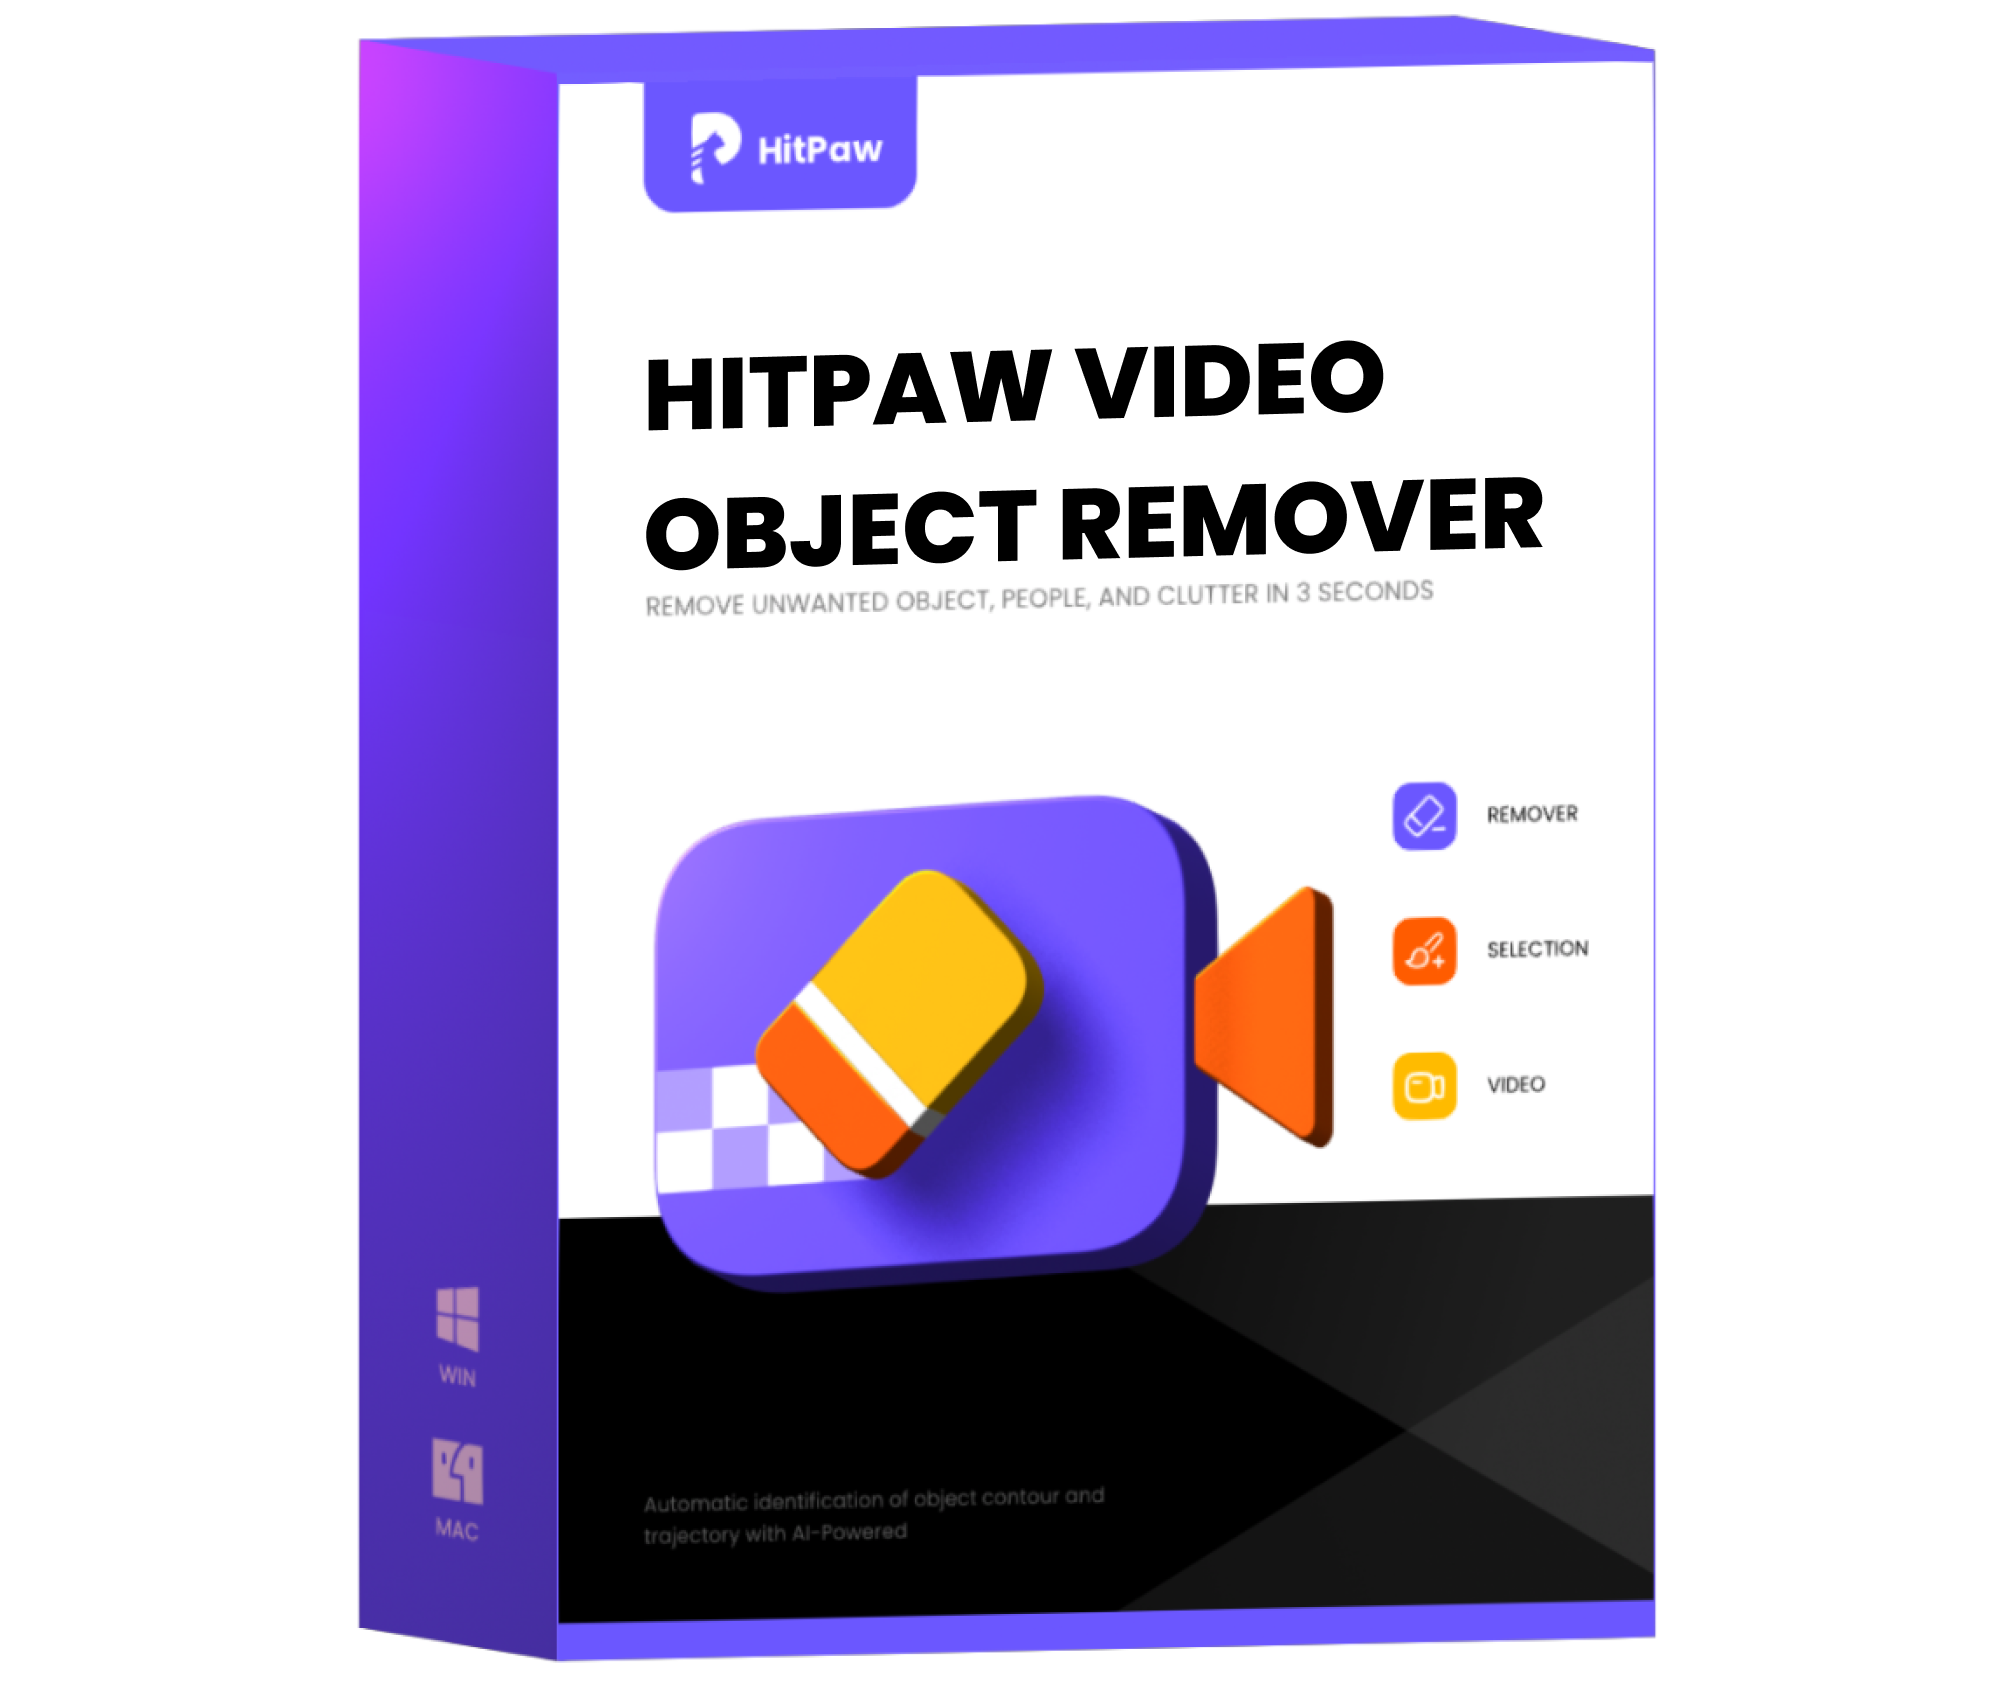 HitPaw Object Remover